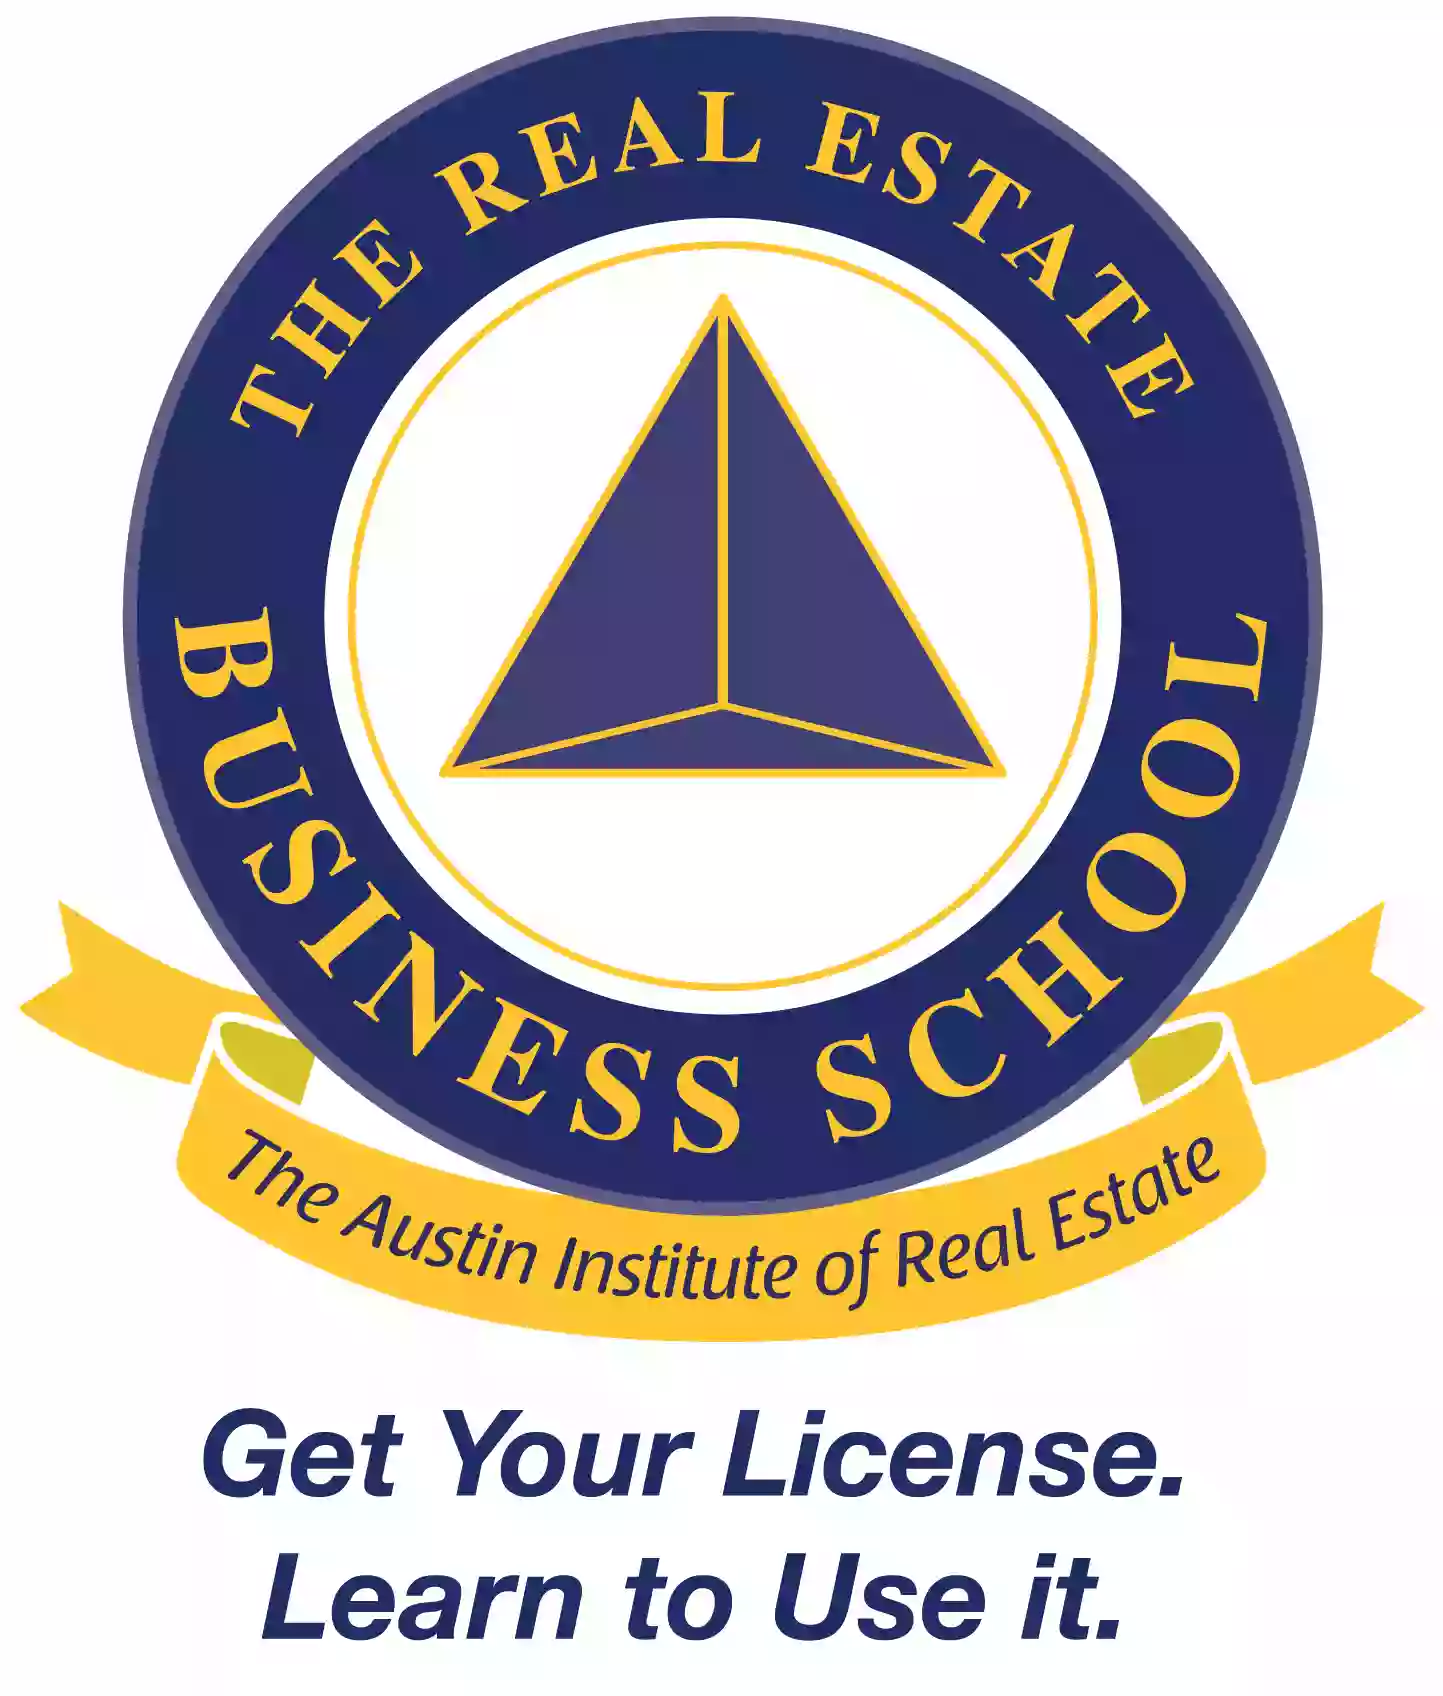 The Real Estate Business School